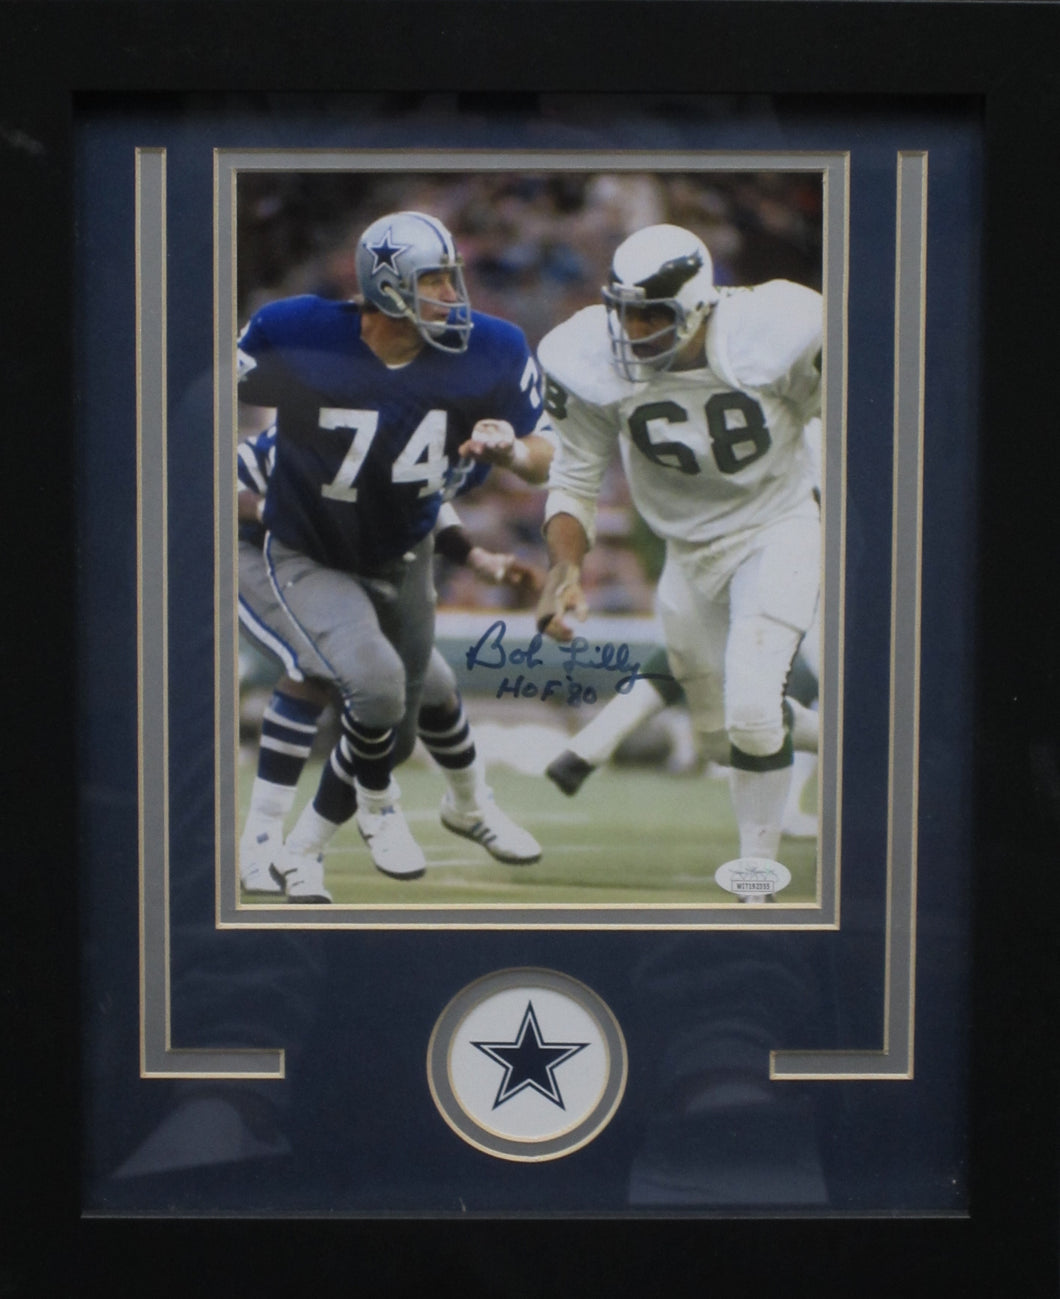 Dallas Cowboys Bob Lilly Signed 11x14 Photo with HOF '81 Inscription Framed & Matted with JSA COA